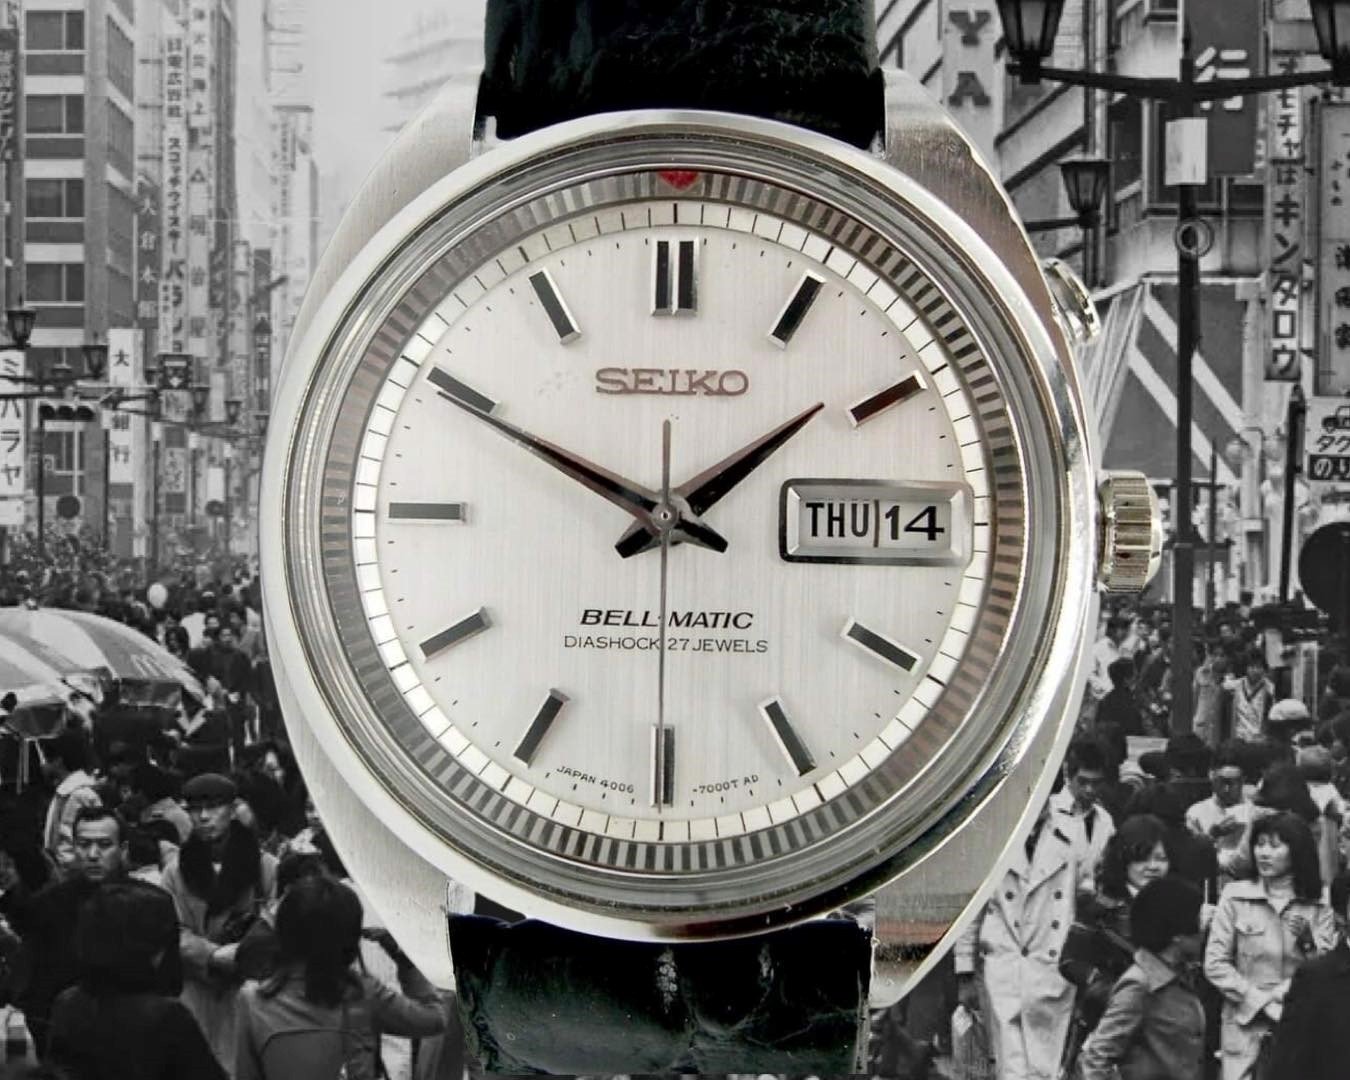 THE SIXTIES IN JAPAN - Montres Publiques - The vintage watch magazine